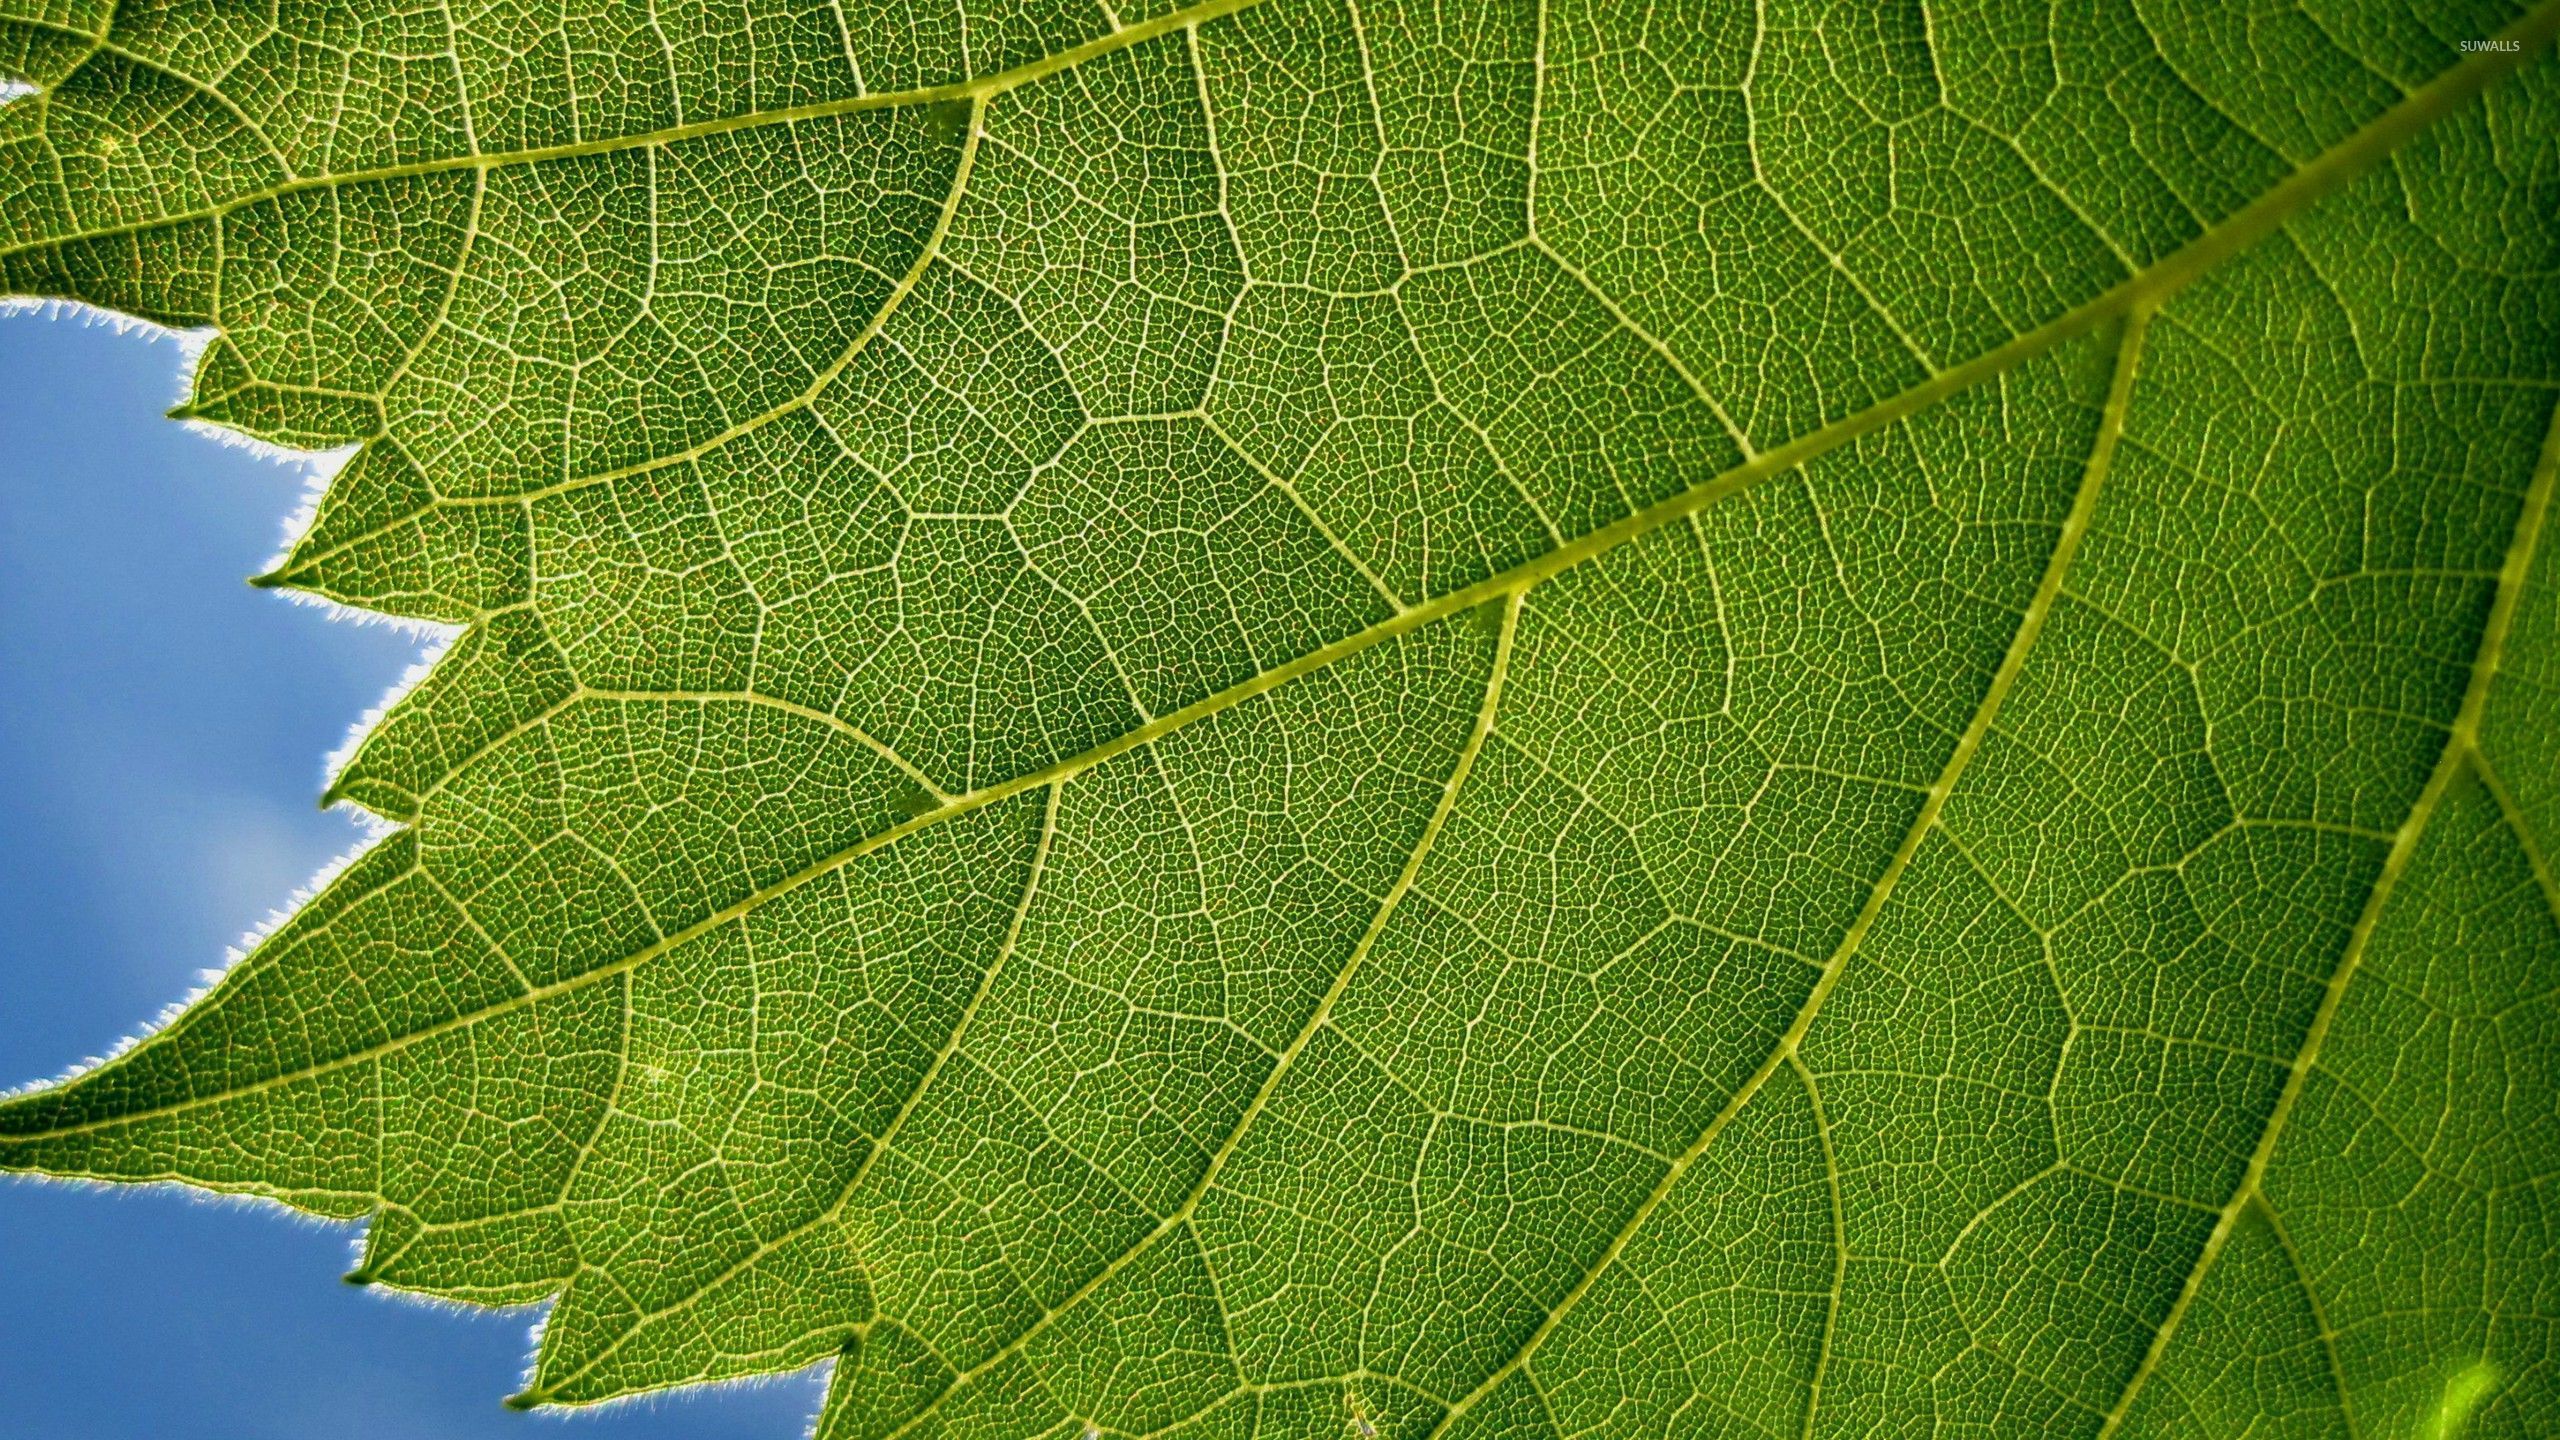 Green leaf close-up wallpaper - Photography wallpapers - #53760